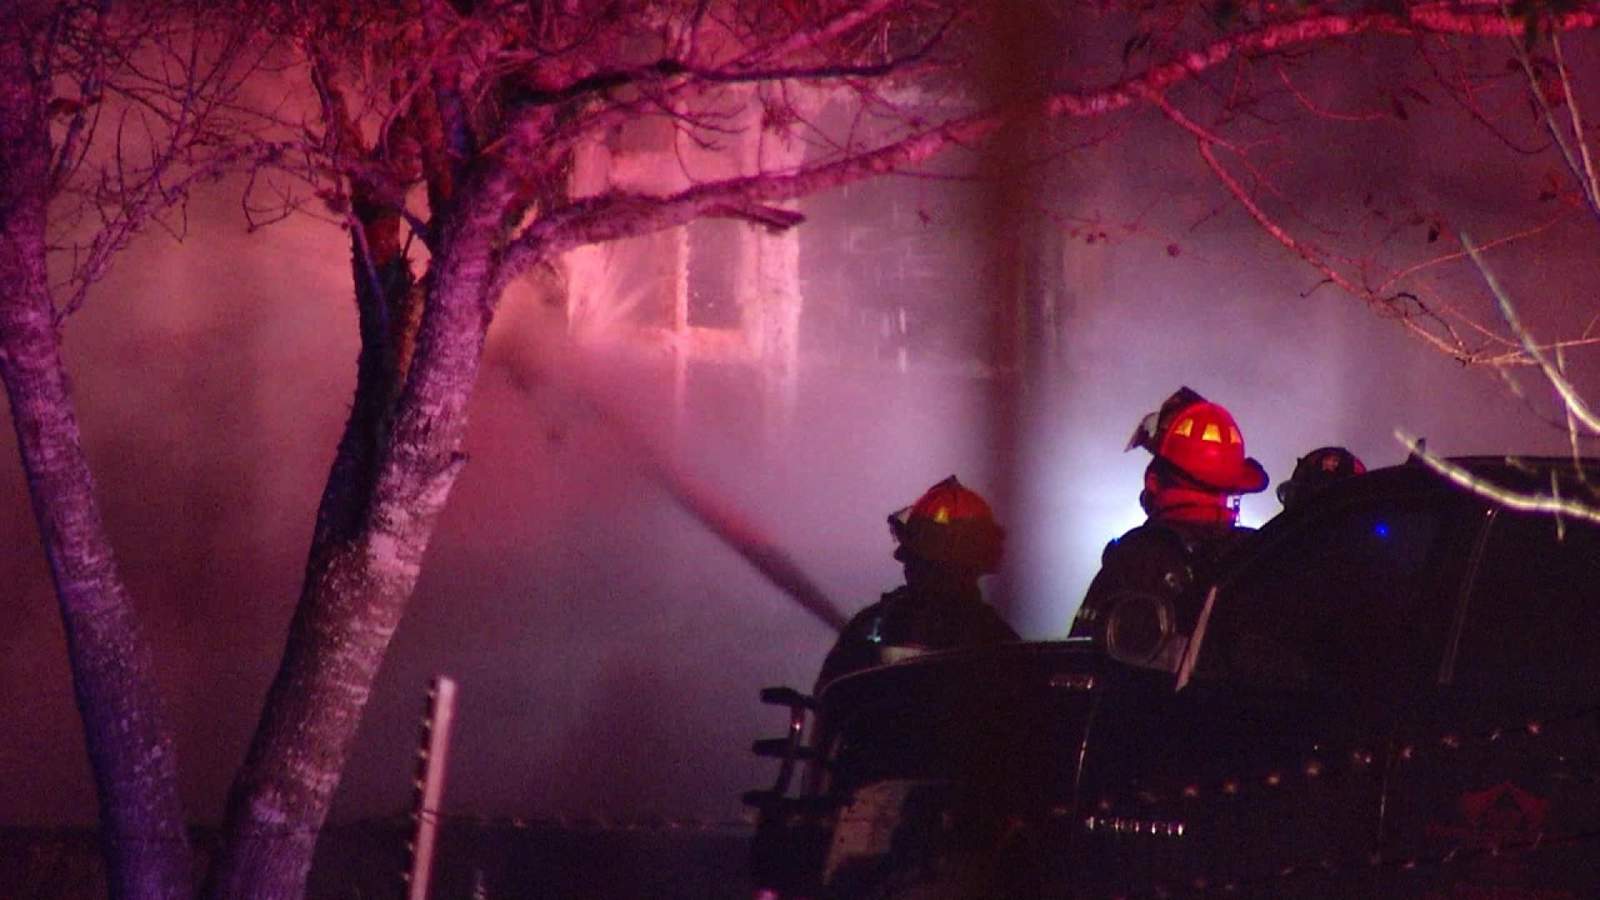 Home in SE Bexar County deemed total loss after fire